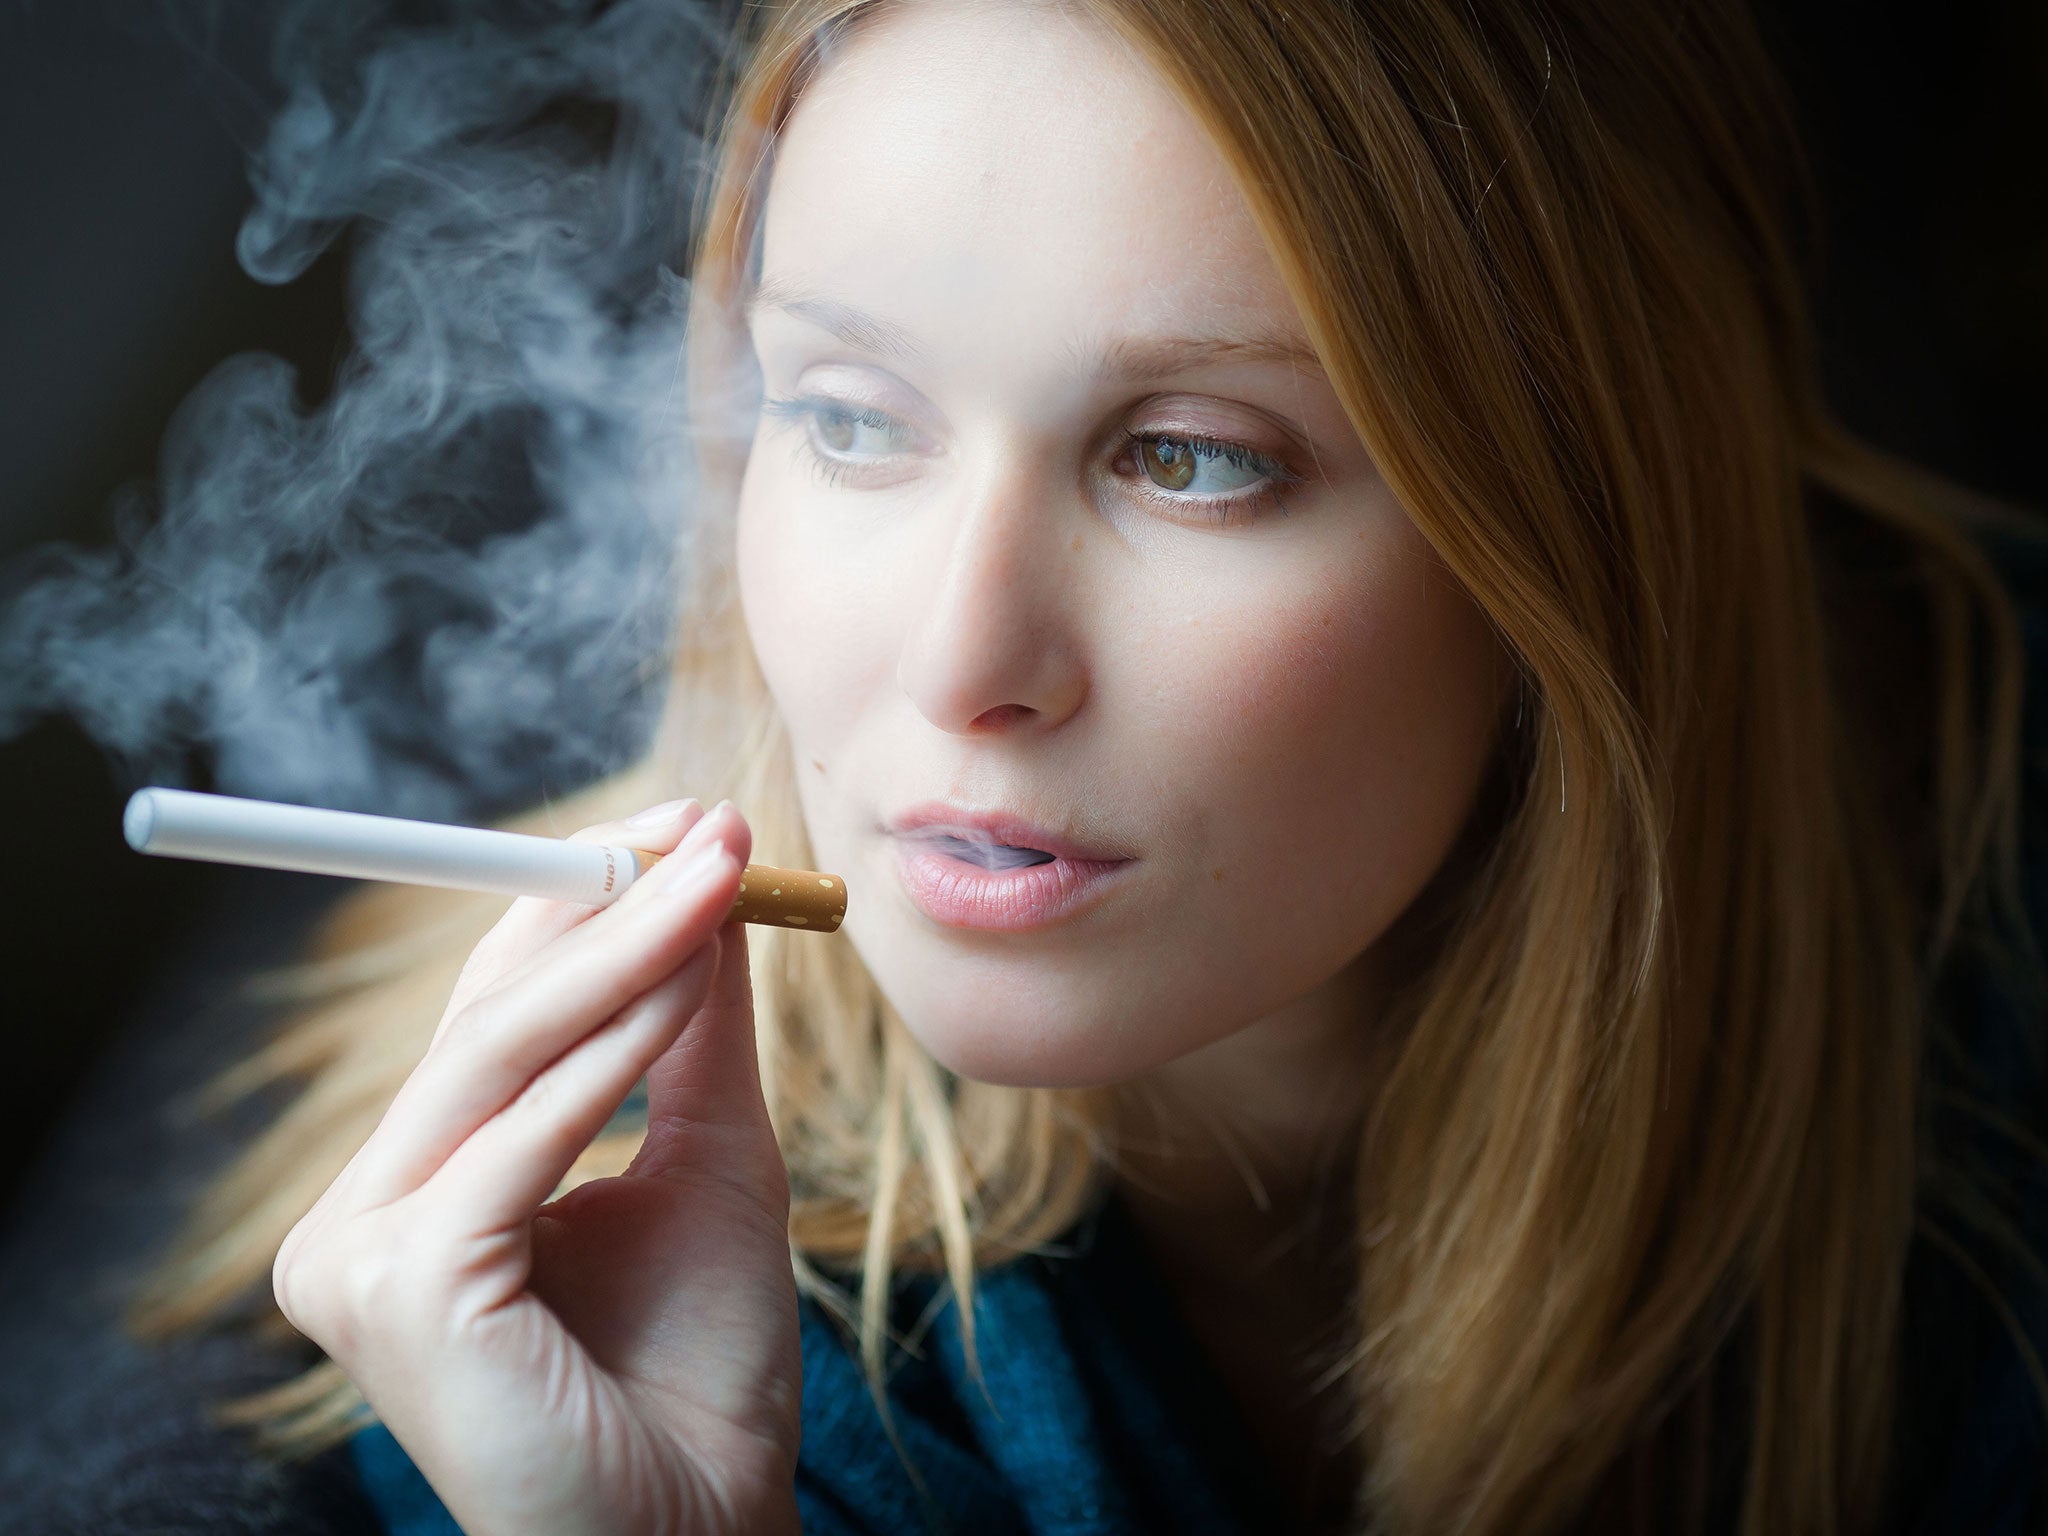 Vaping appears to make it easier to quit smoking